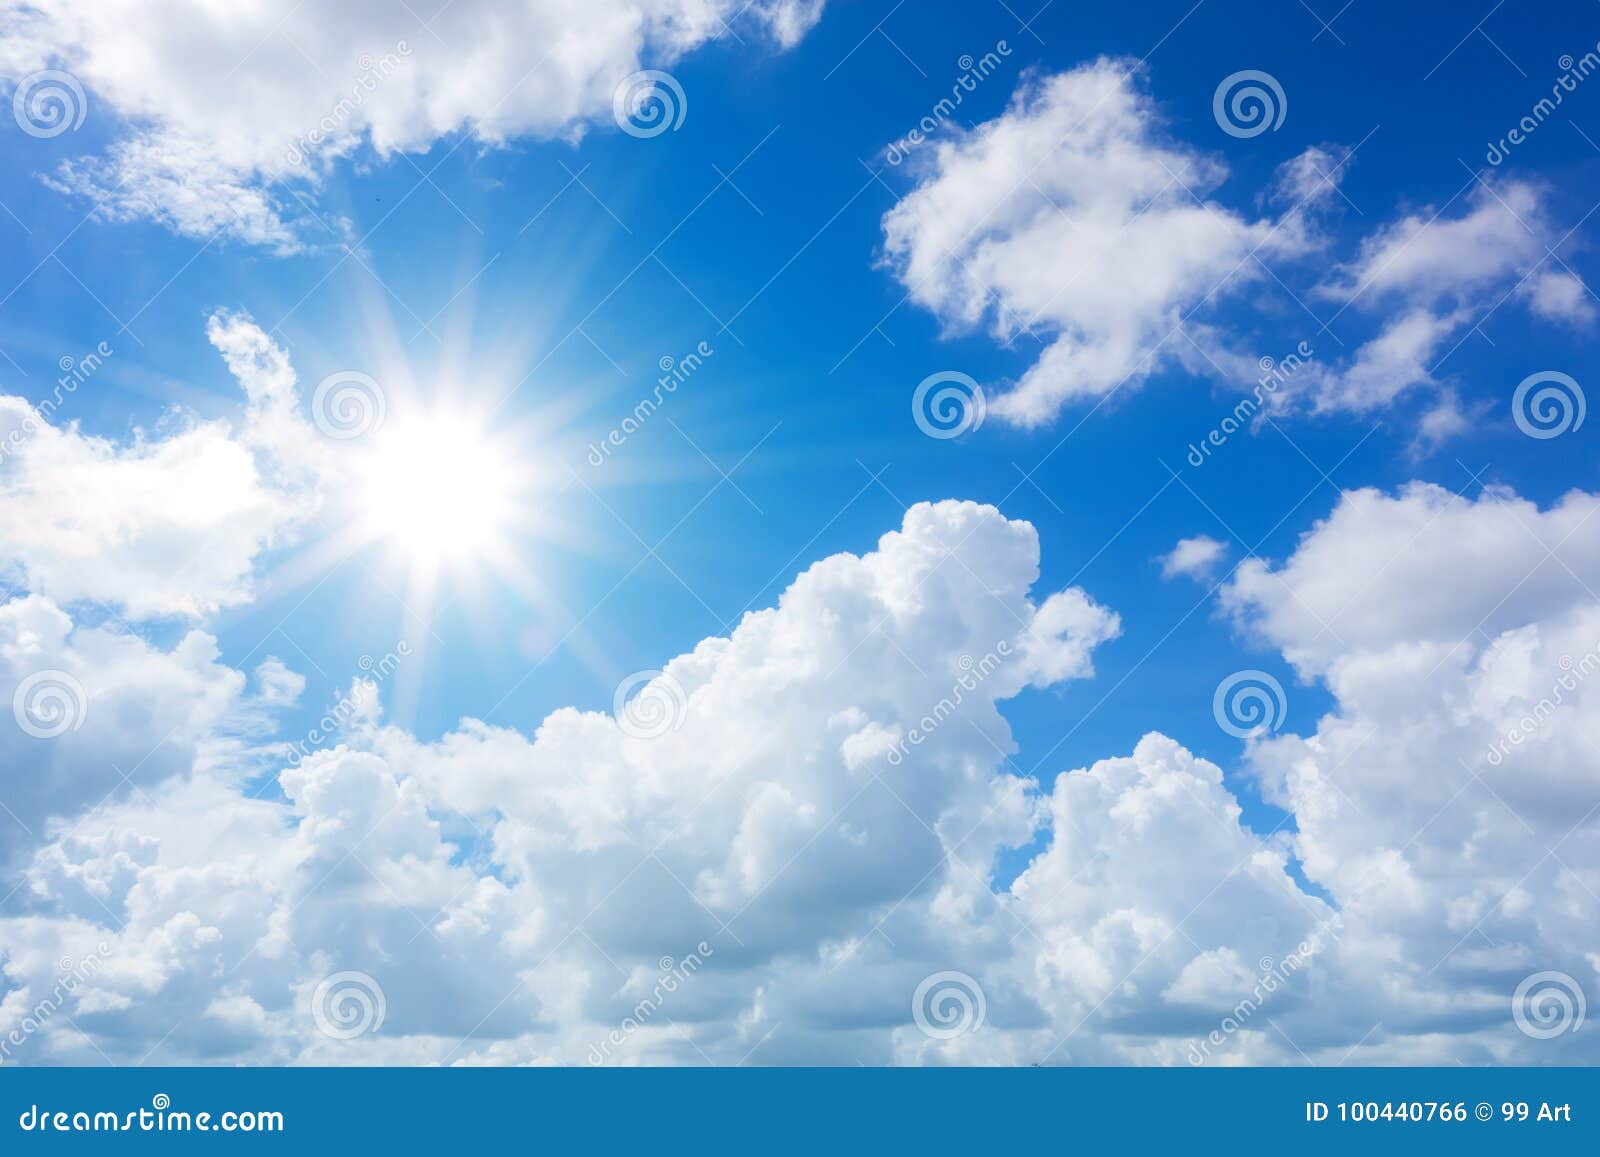 blue sky with clouds and sun reflection.the sun shines bright in